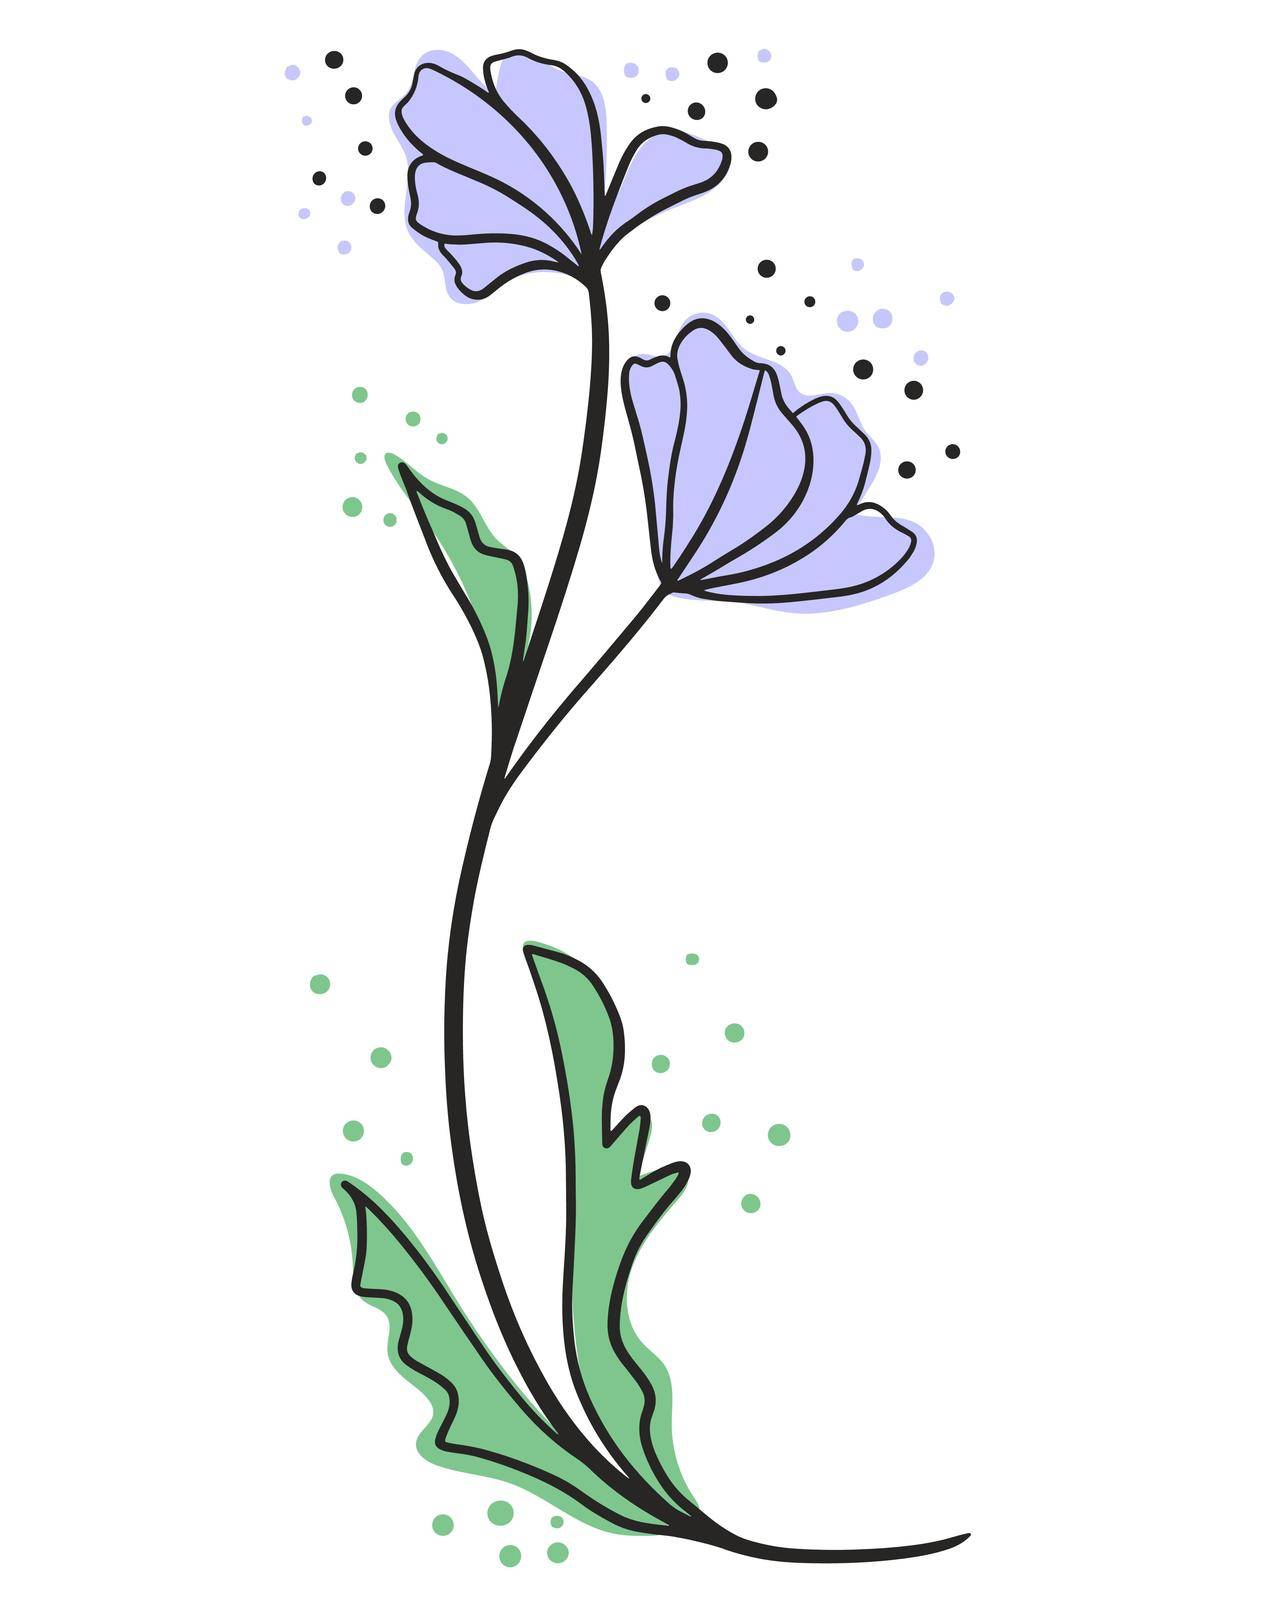 Graceful flower hand drawing vector illustration. Twig with flower buds and leaves, isolated object. Black lines and colored spots, an element for decoration.